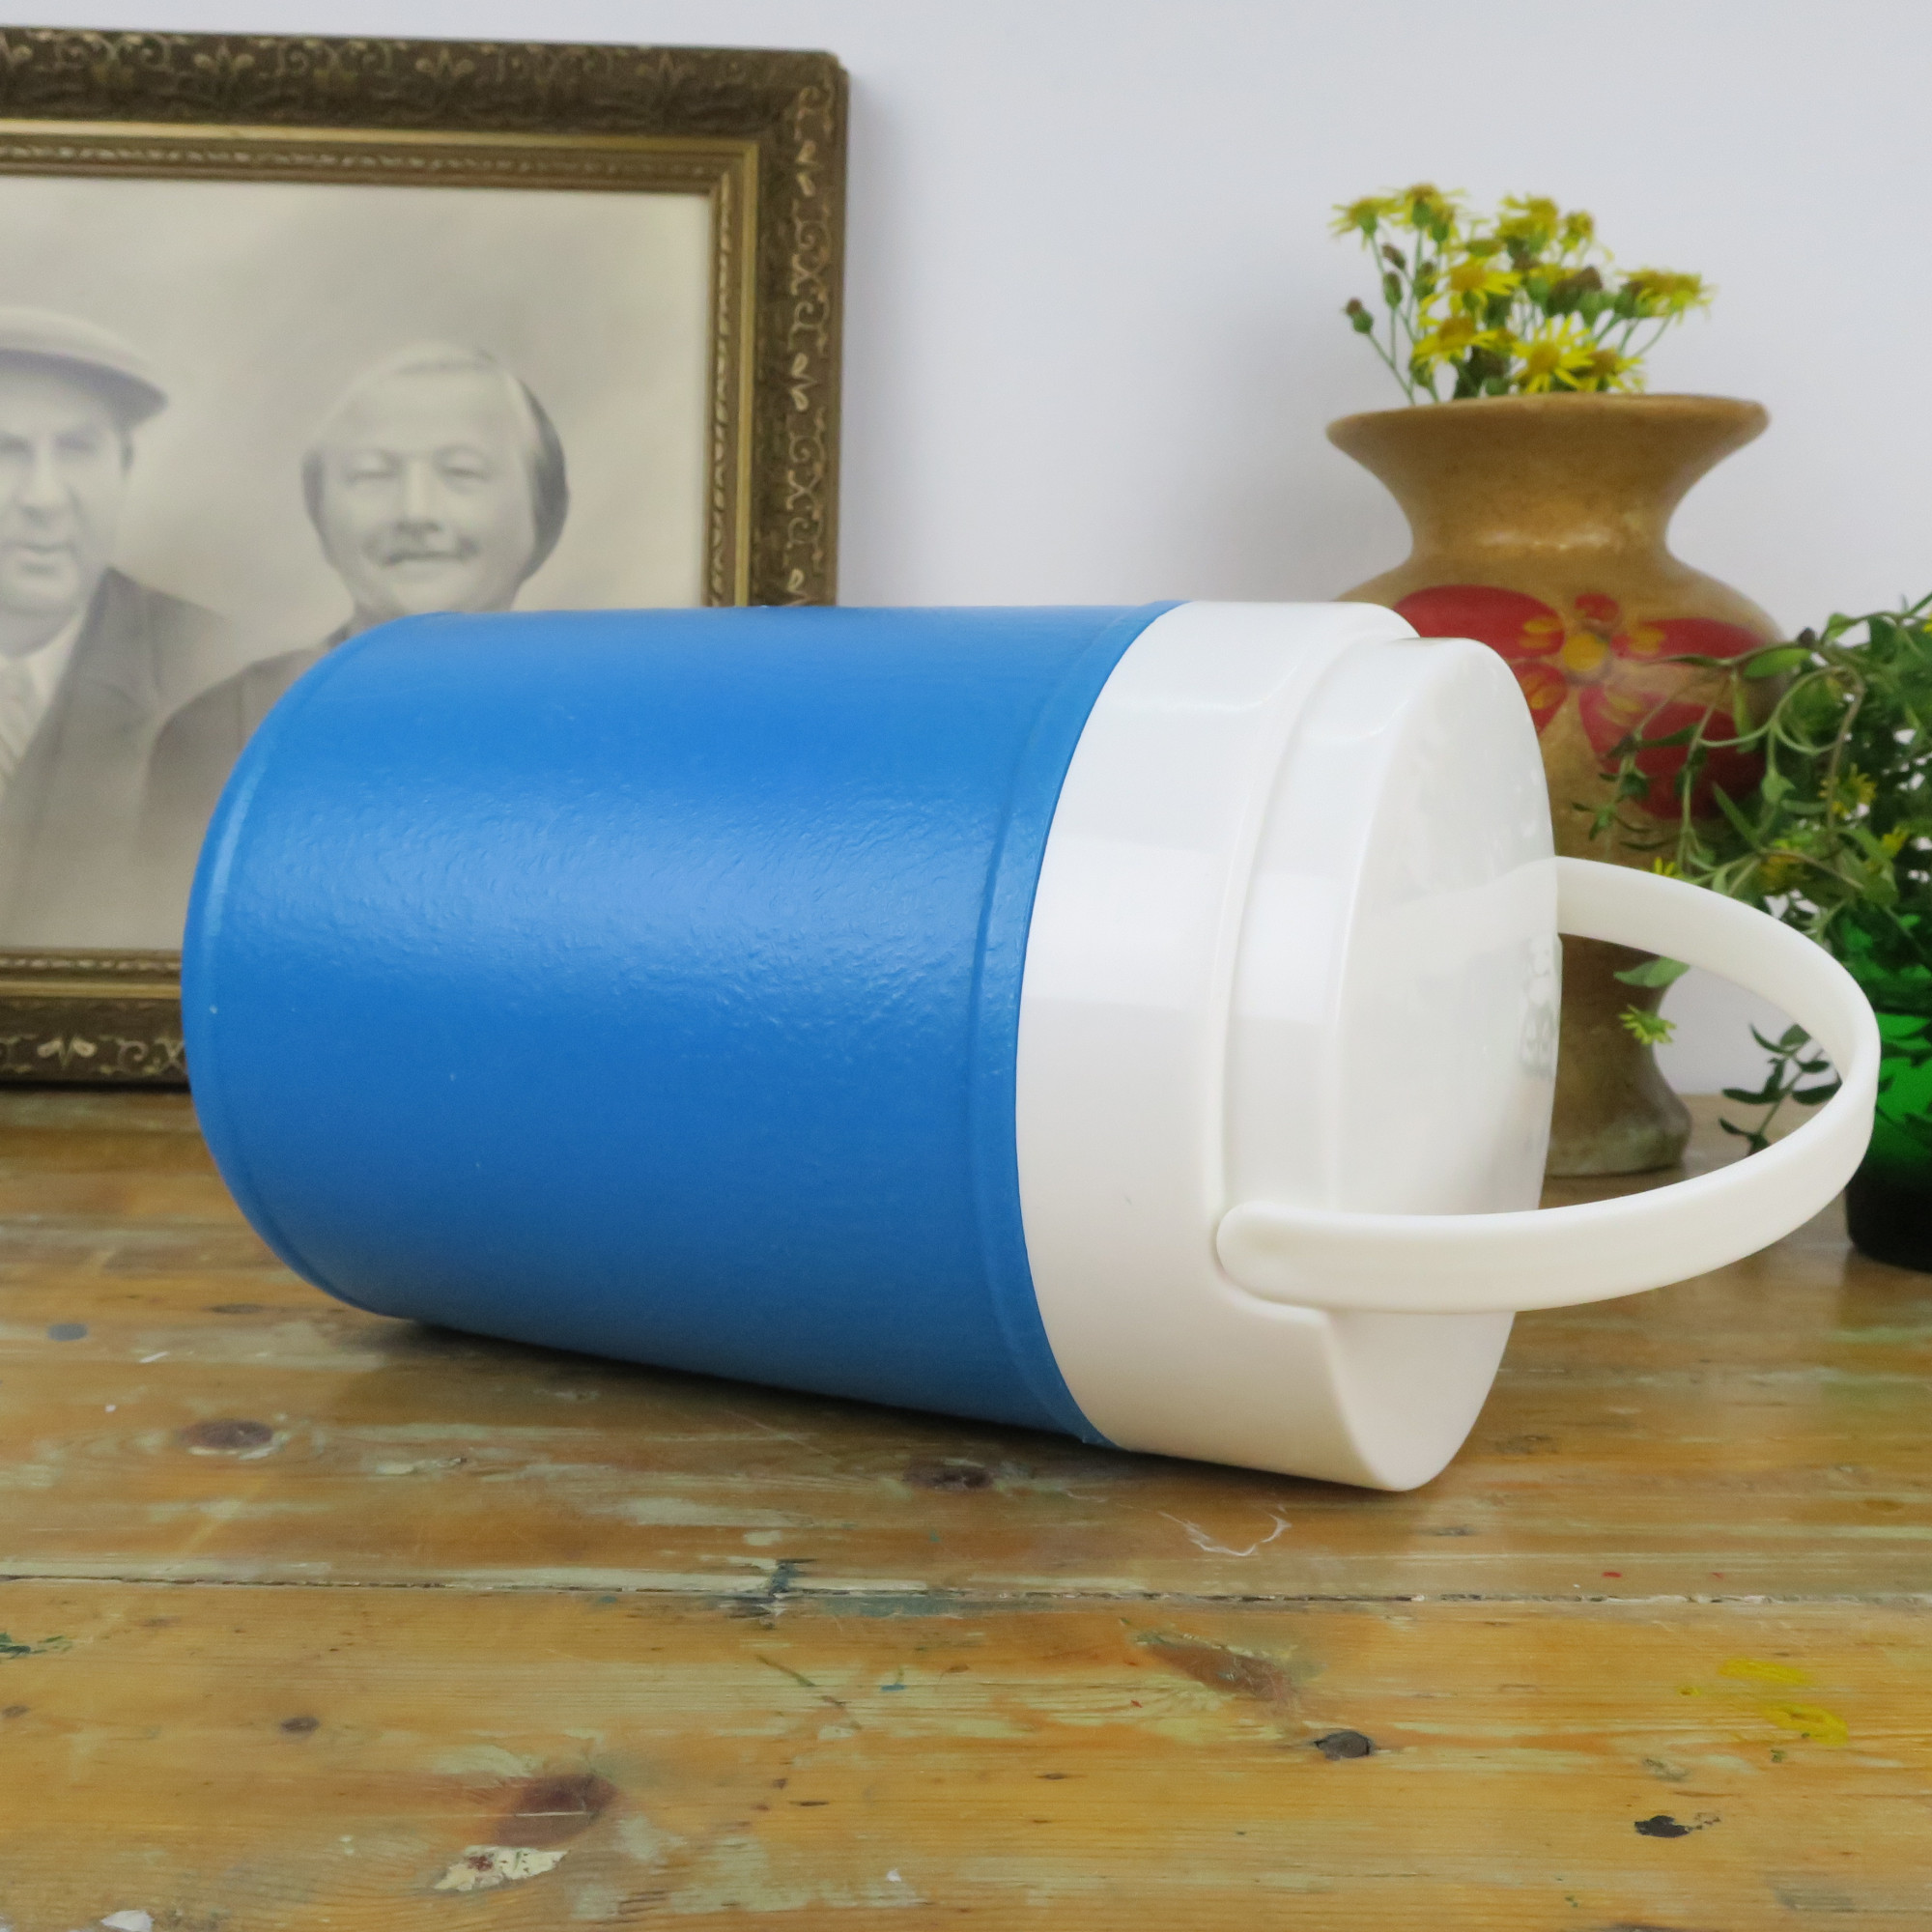 Vintage Isotherm Camping Gaz Water Thermos Cooler Made in Italy 1992  Collectible Rare Festival Couture Thermos Portable Cooler -  Finland